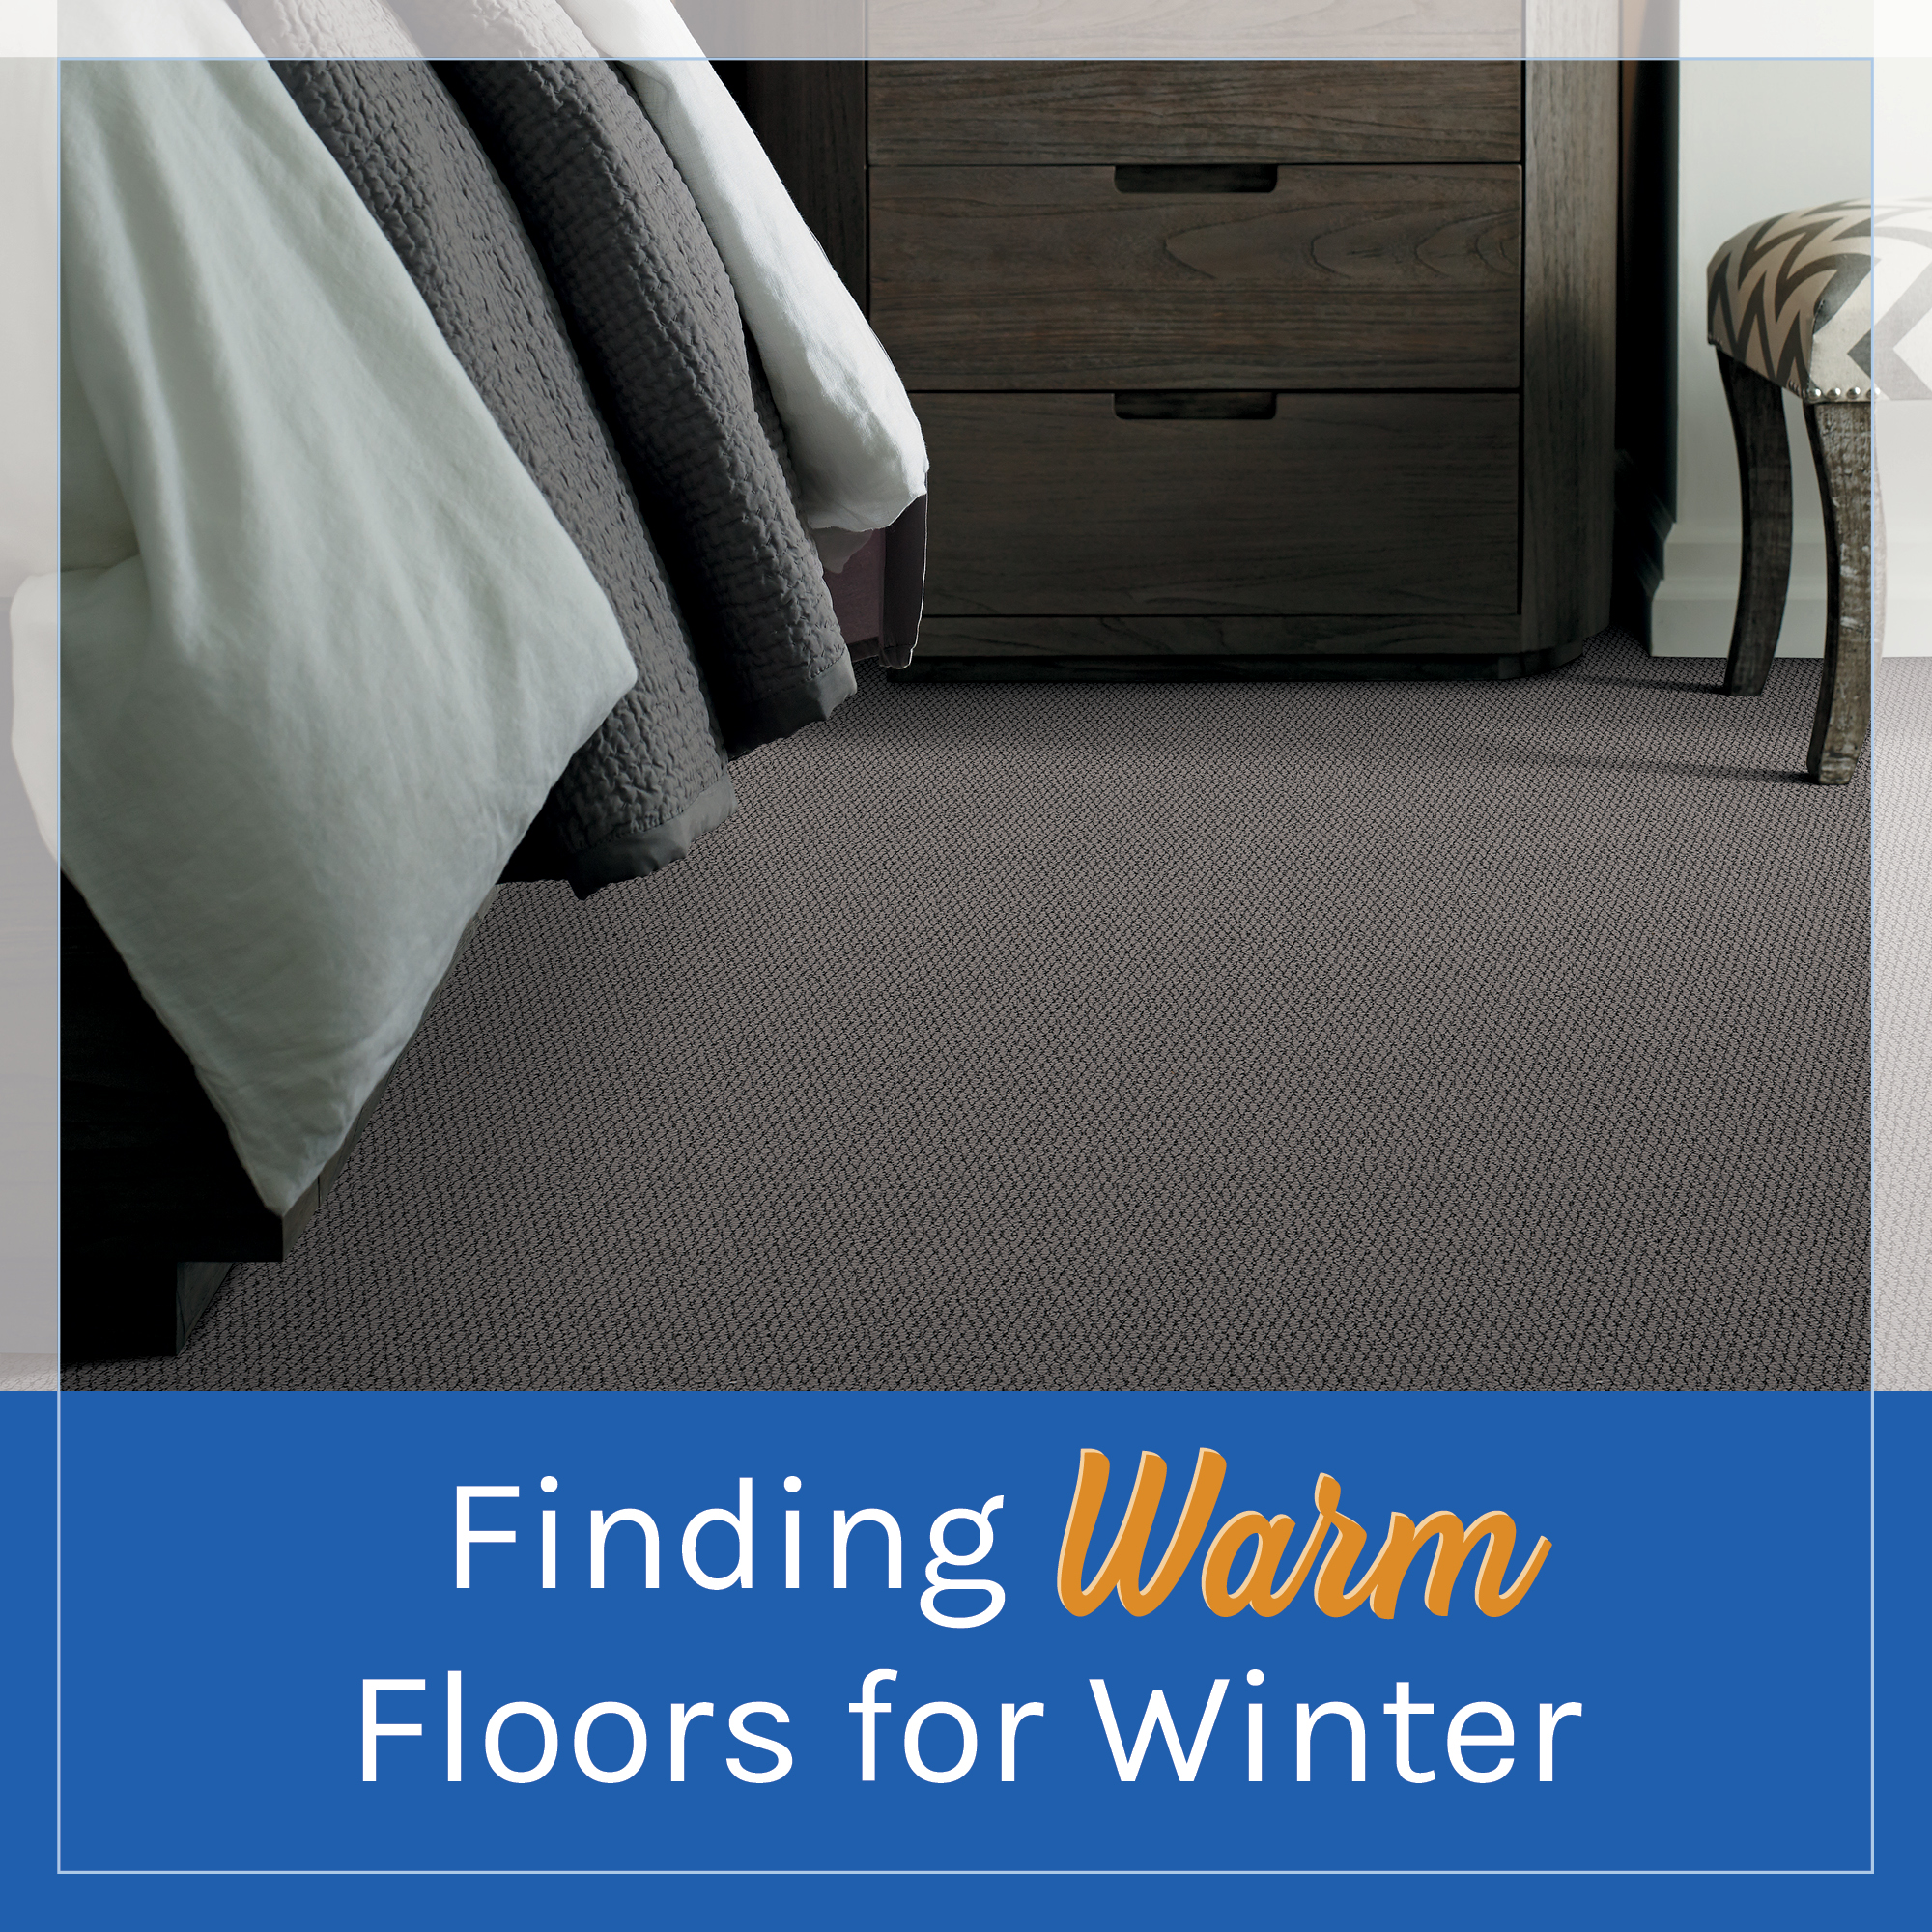 Finding Warm Floors for Winter